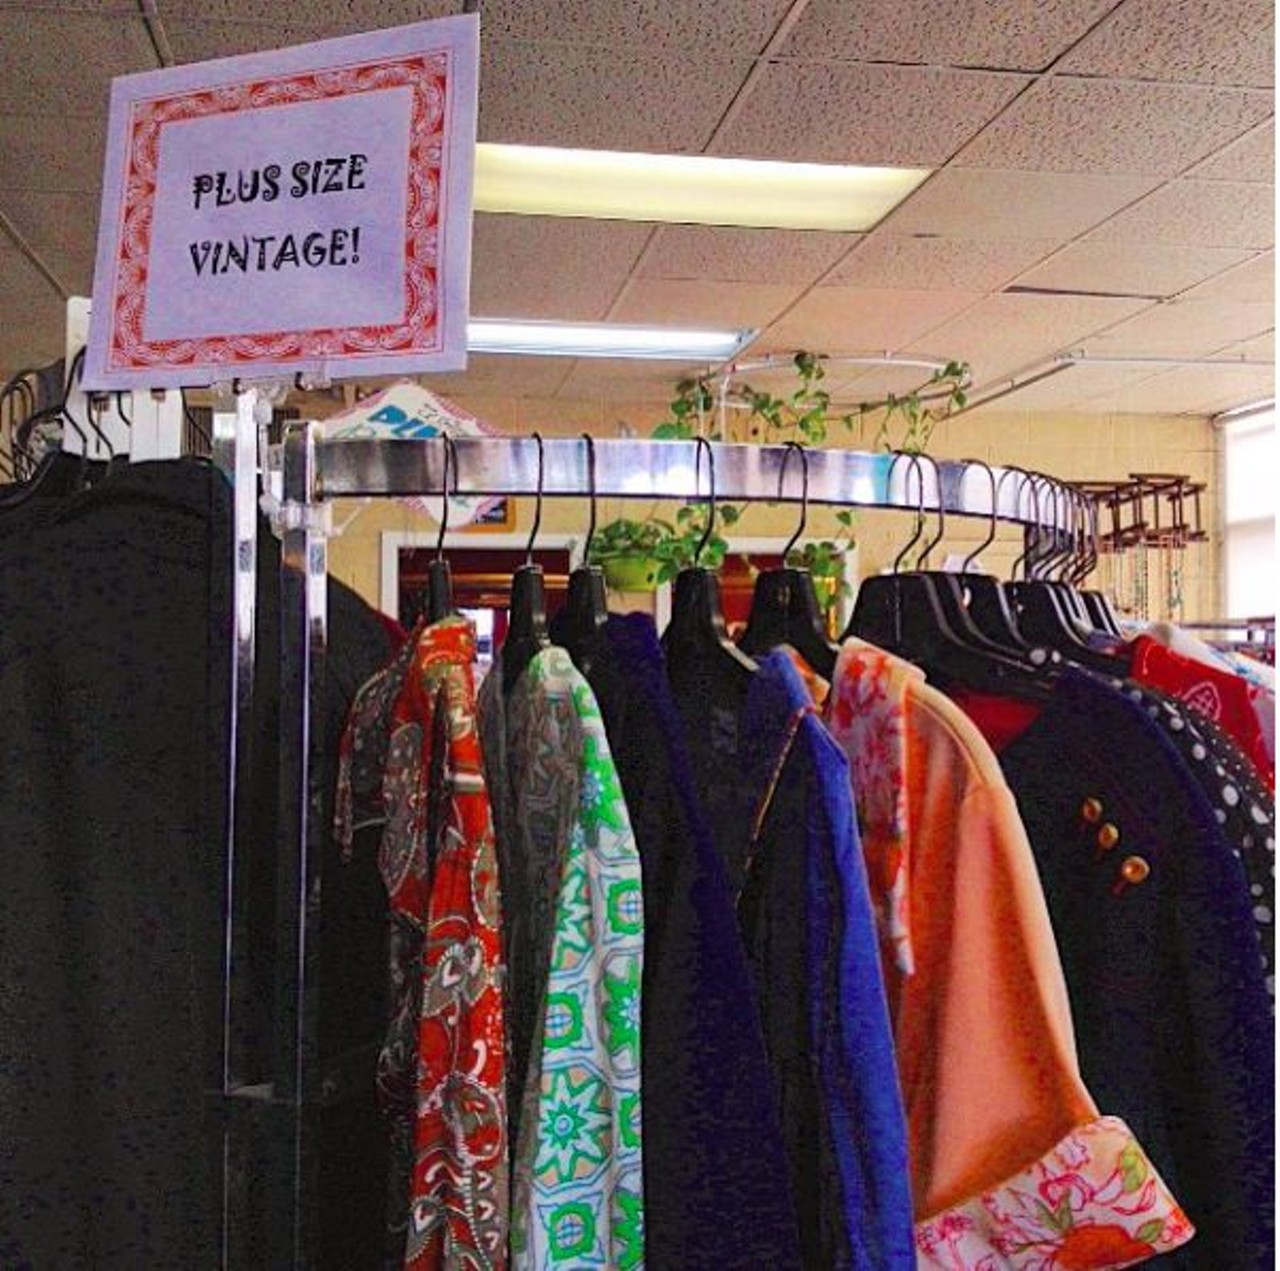 Regeneration New-Used Clothing
23700 Woodward Ave, Pleasant Ridge
A reasonably priced consignment store with the coolest threads. Complete with a great selection of your brand favorites. If you&#146;re new to the thrift lifestyle, this is a great place to start. 
(Photo courtesy of Regeneration's Instagram page)